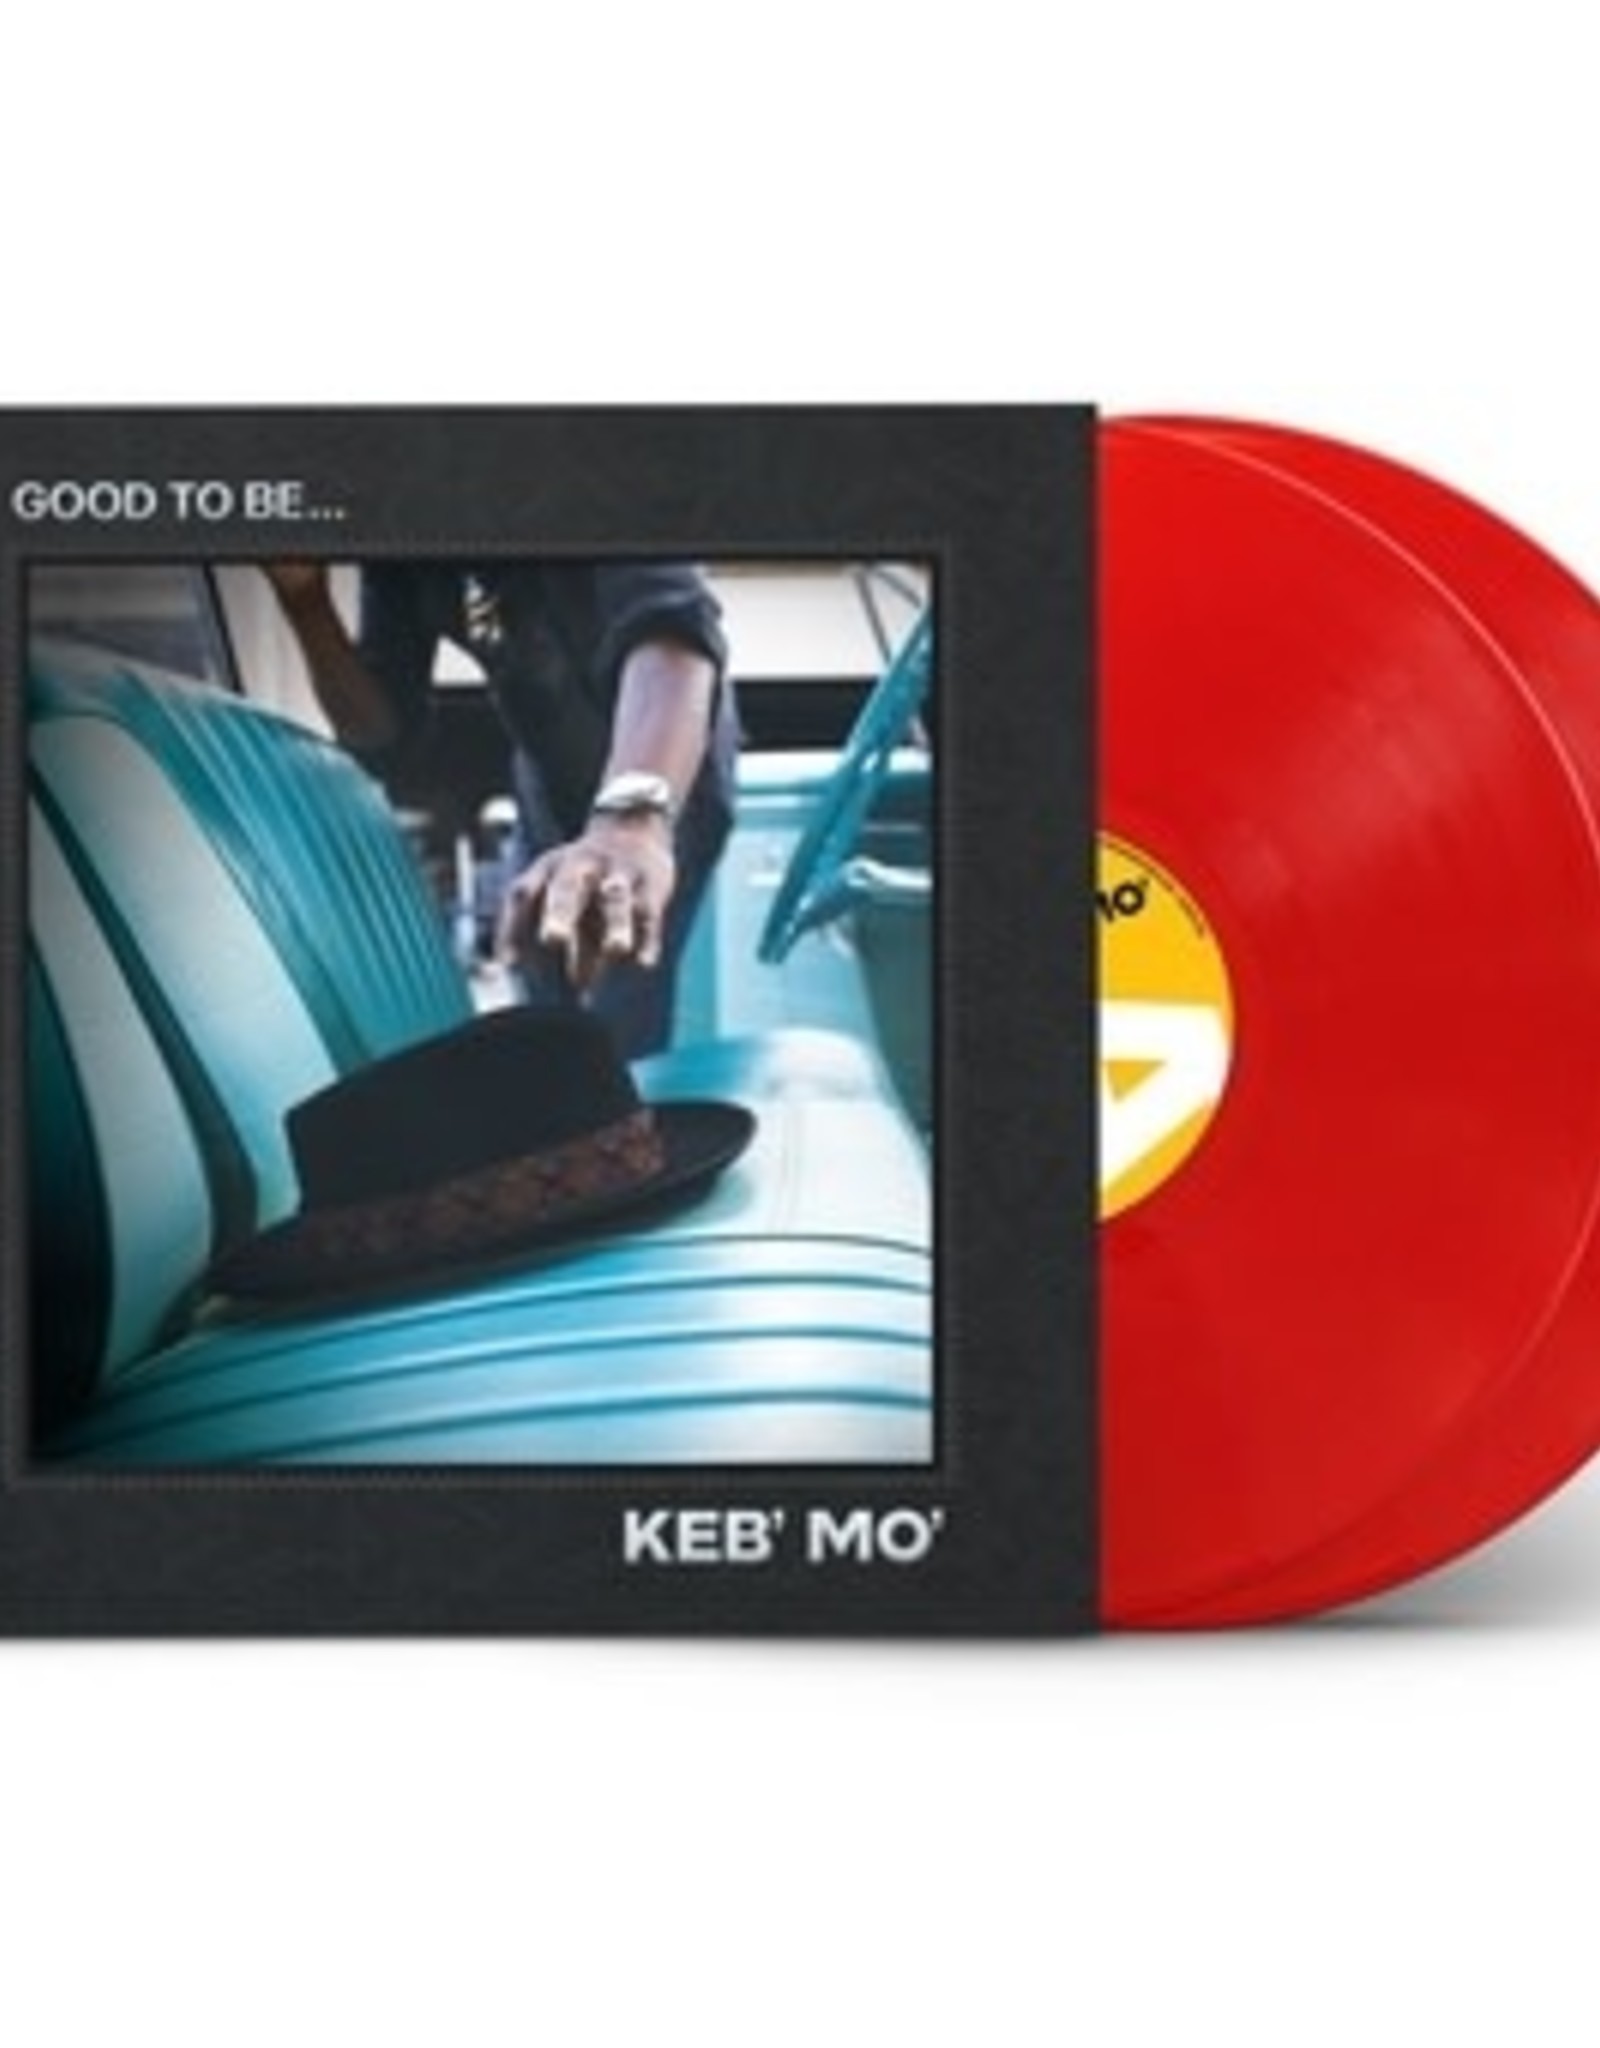 Keb' Mo' - Good to Be... (Red Vinyl)